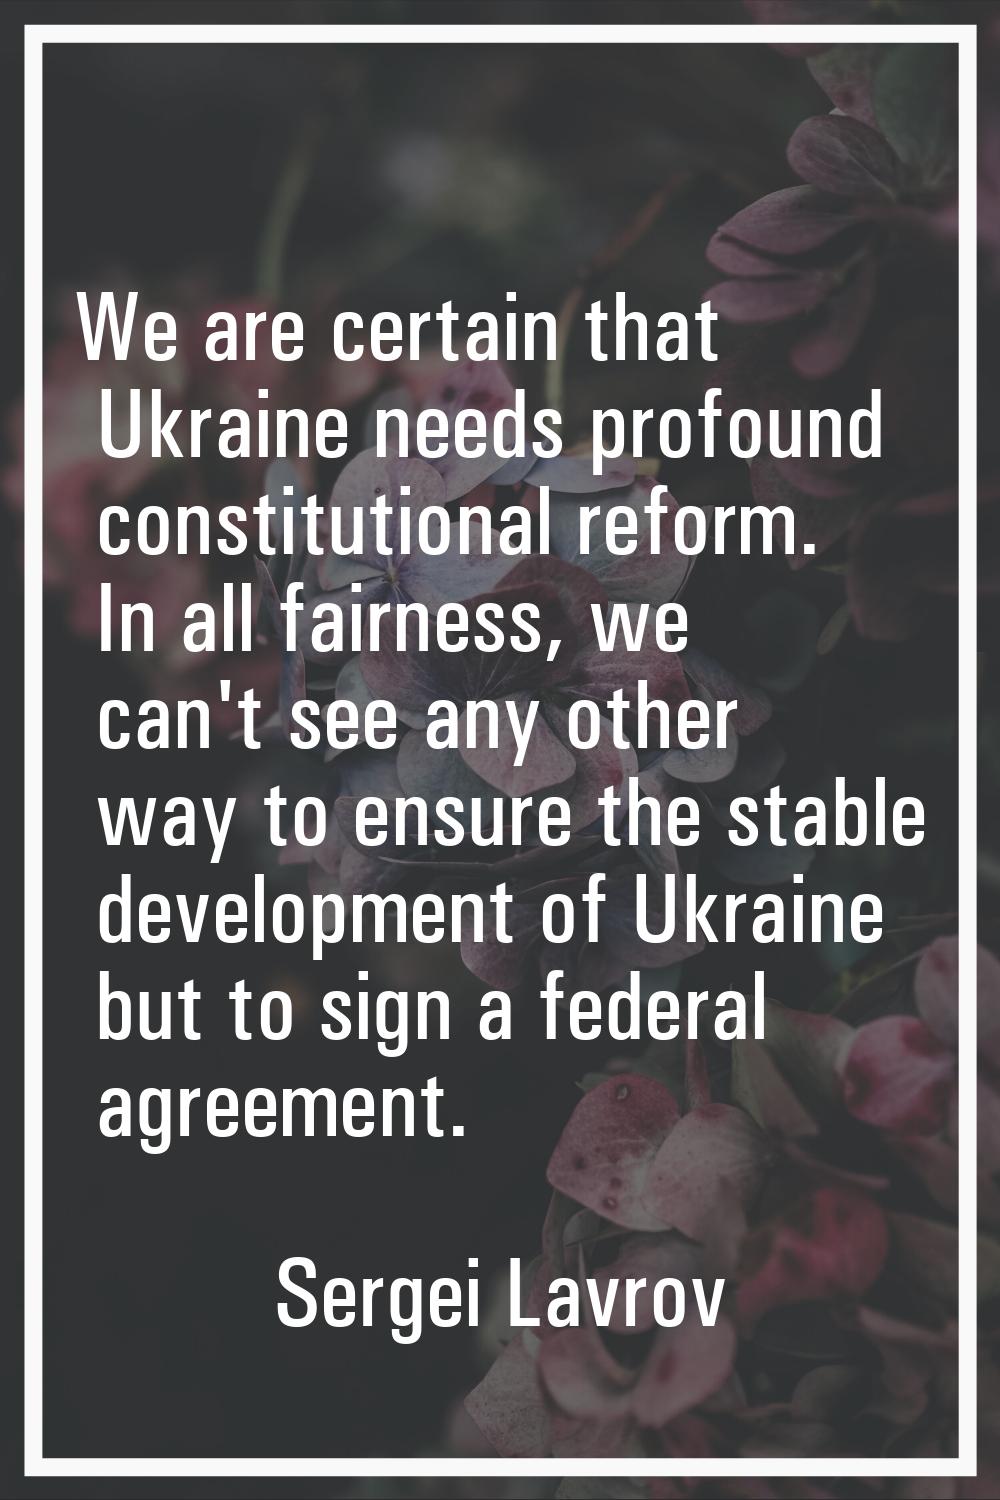 We are certain that Ukraine needs profound constitutional reform. In all fairness, we can't see any